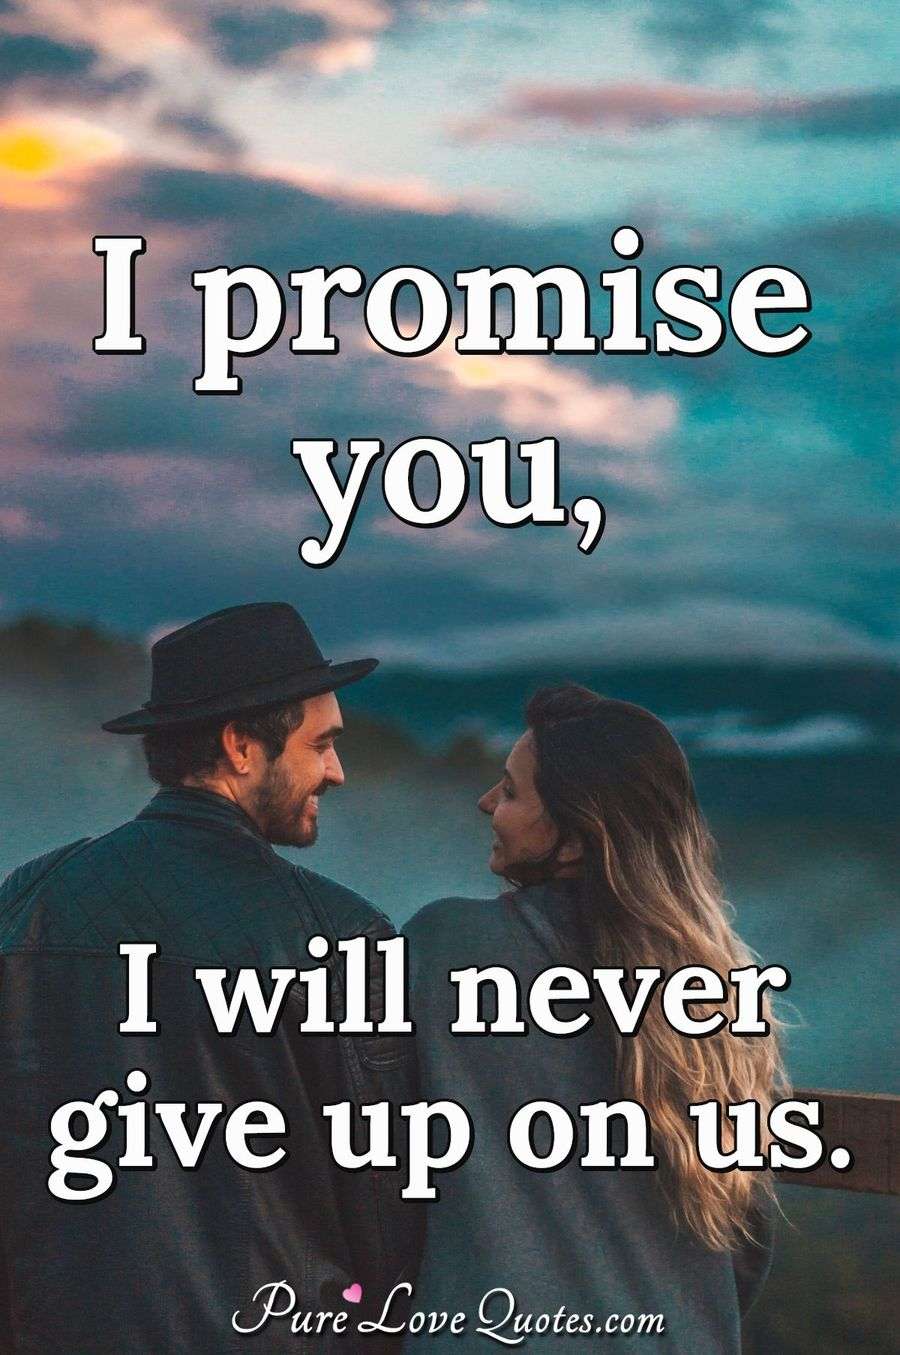 Promise To Love You Quotes Forever Purelovequotes